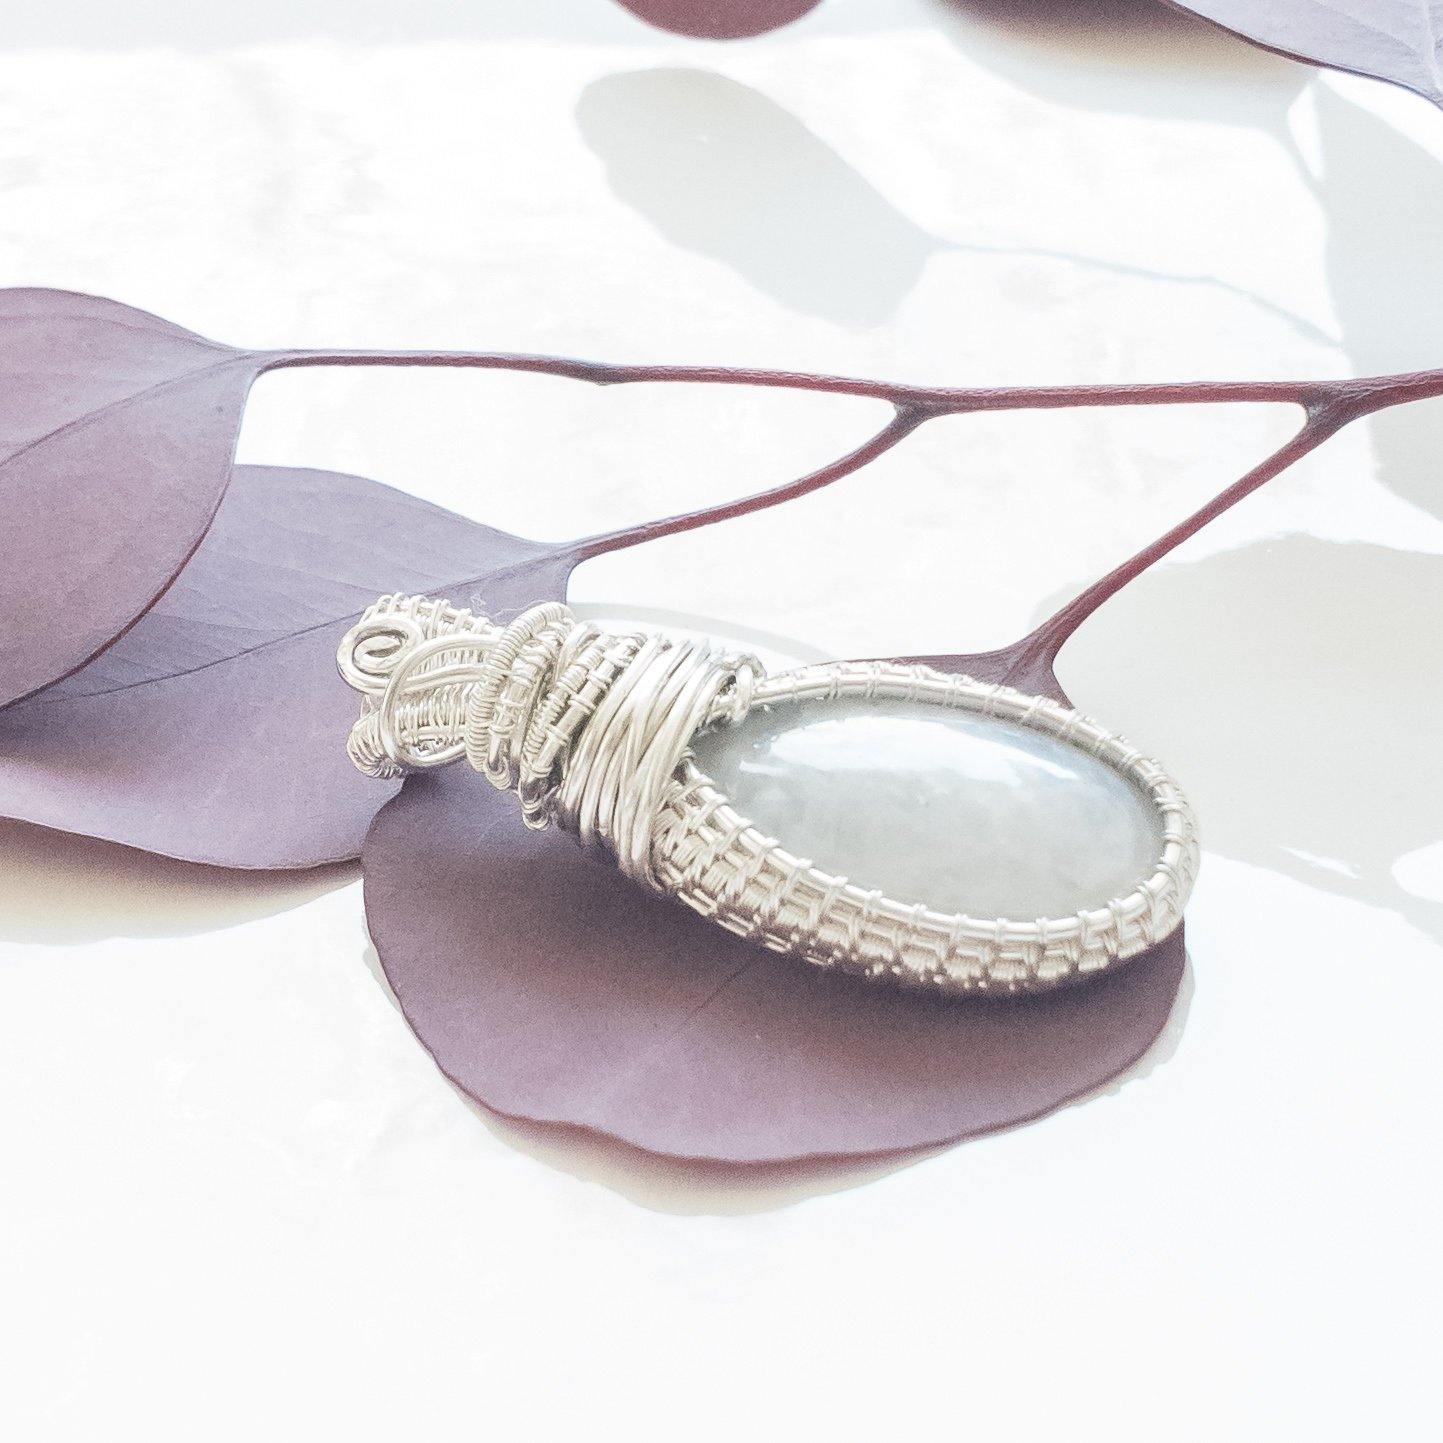 Exquisite Natural Moonstone Pendant designed in Sterling Silver - side view - BellaChel Jeweler